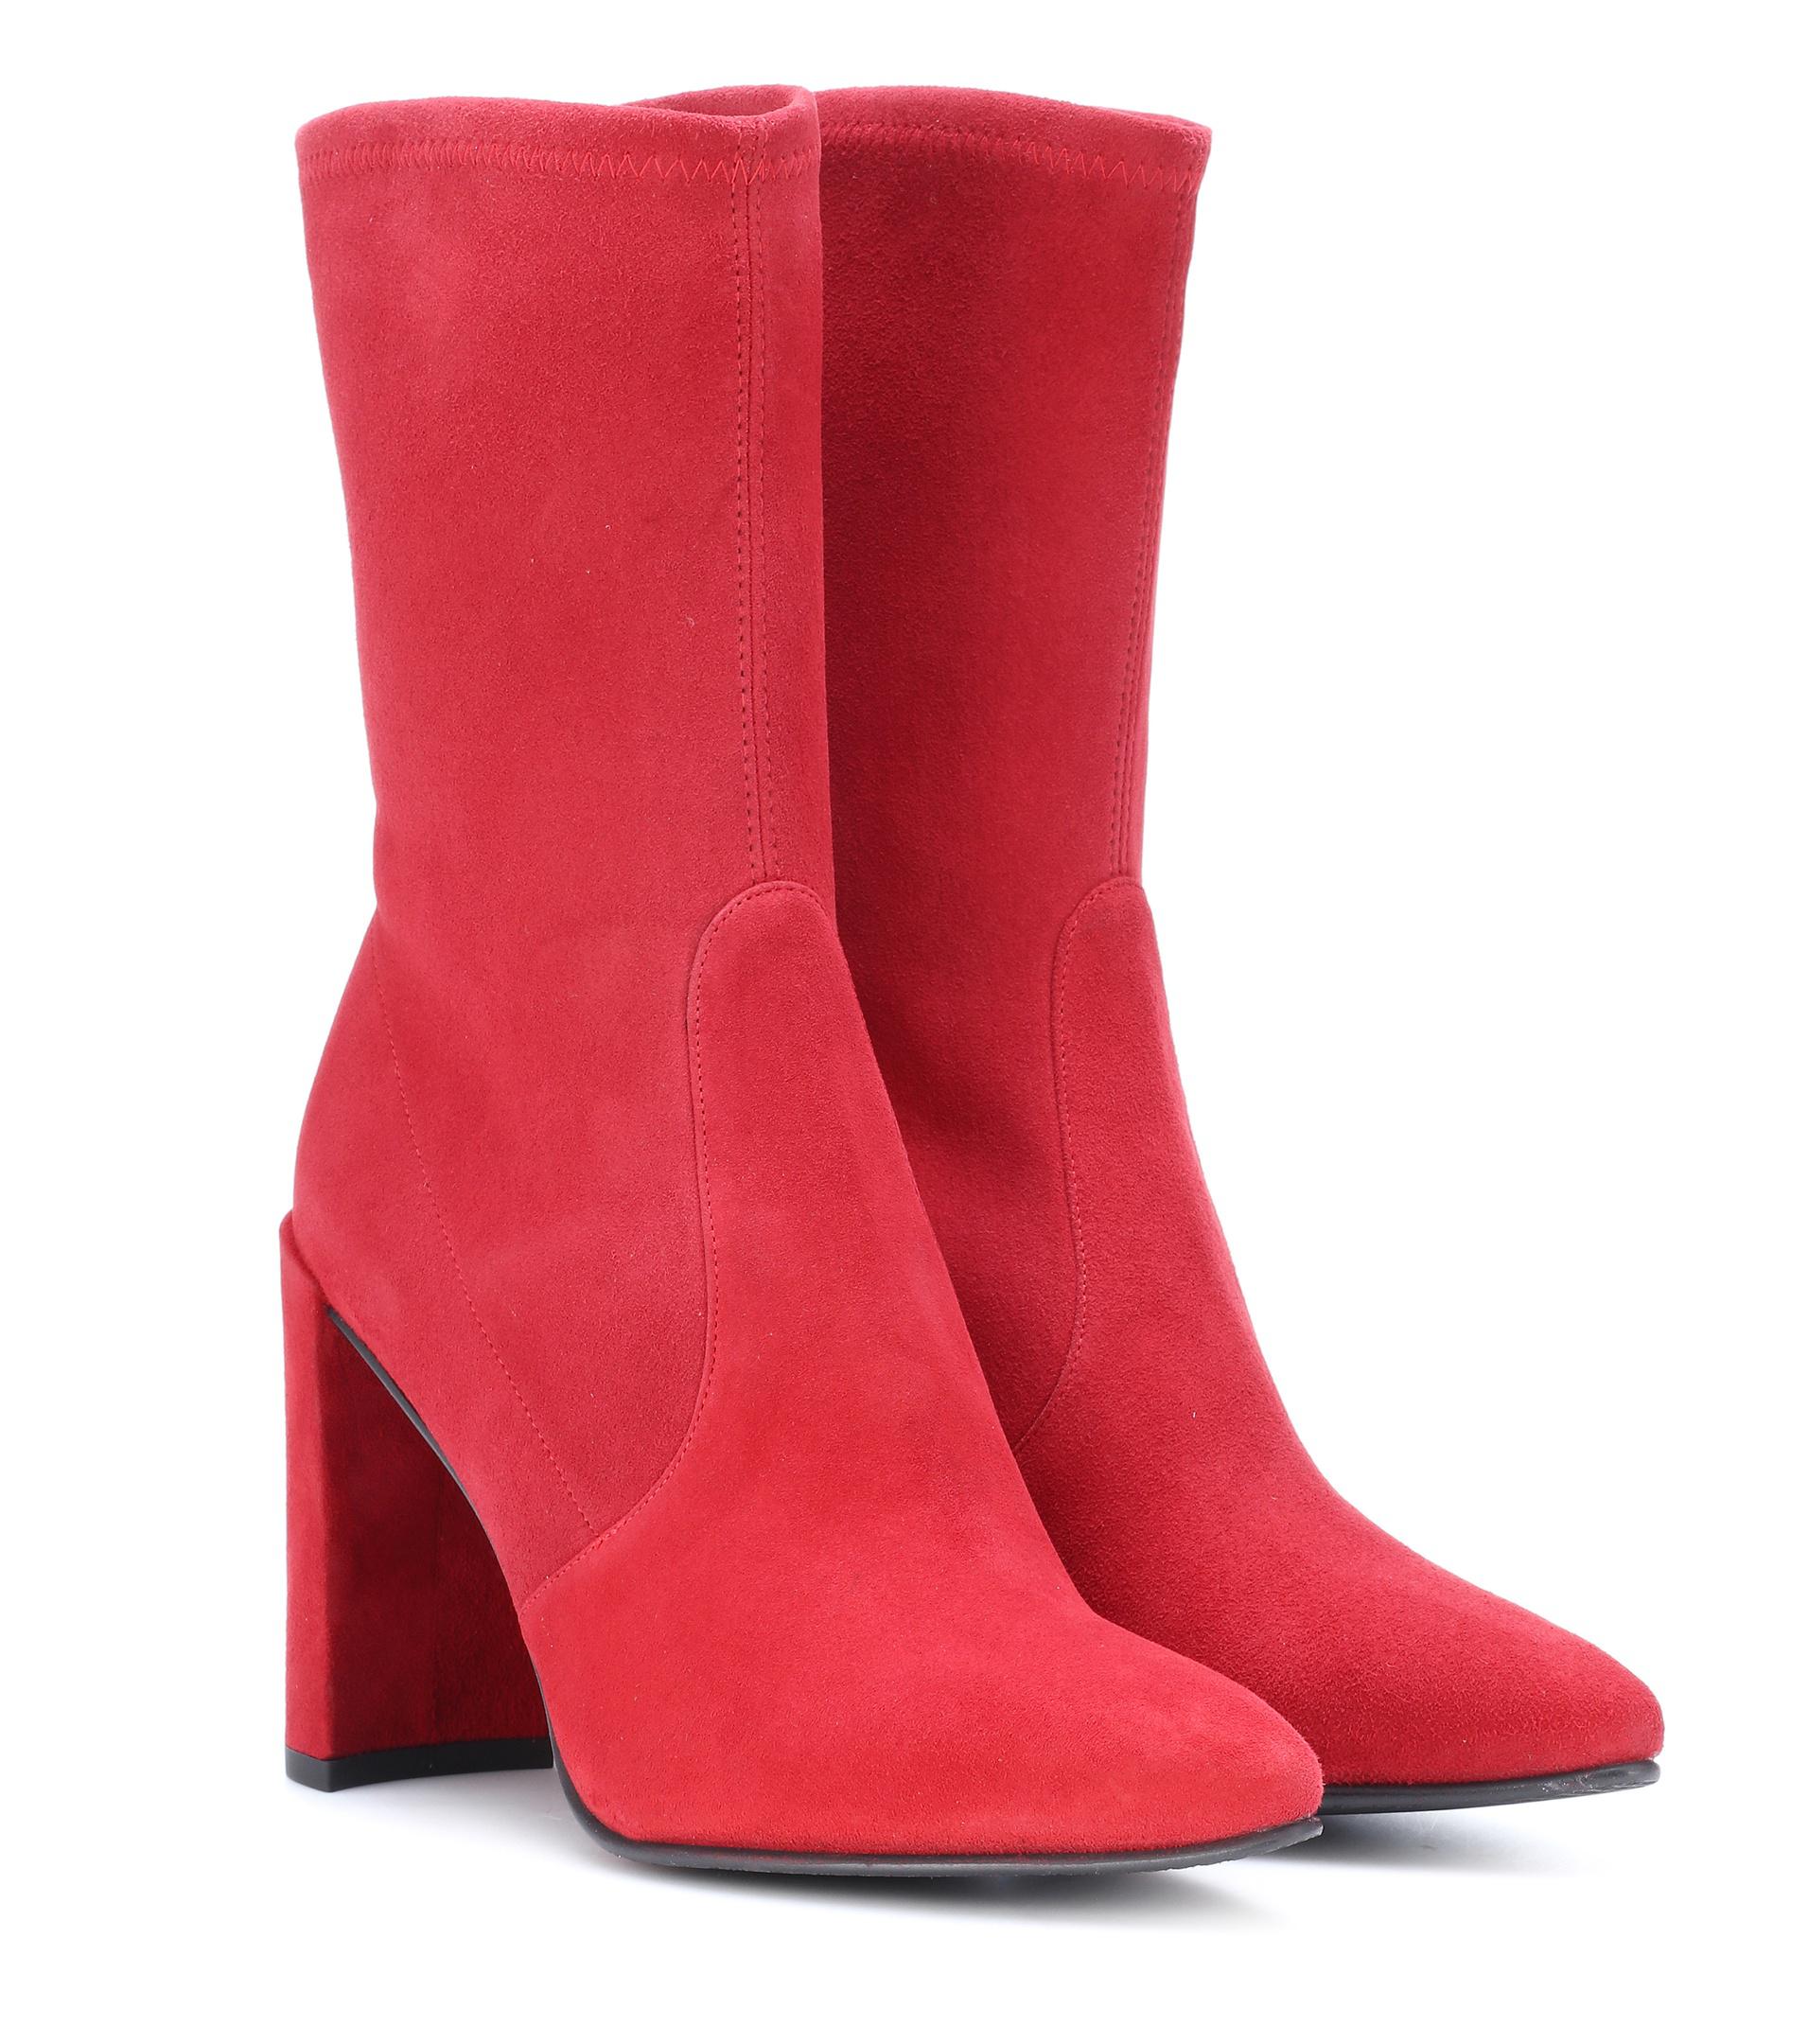 Stuart Weitzman Clinger Suede Ankle Boots in Red - Lyst